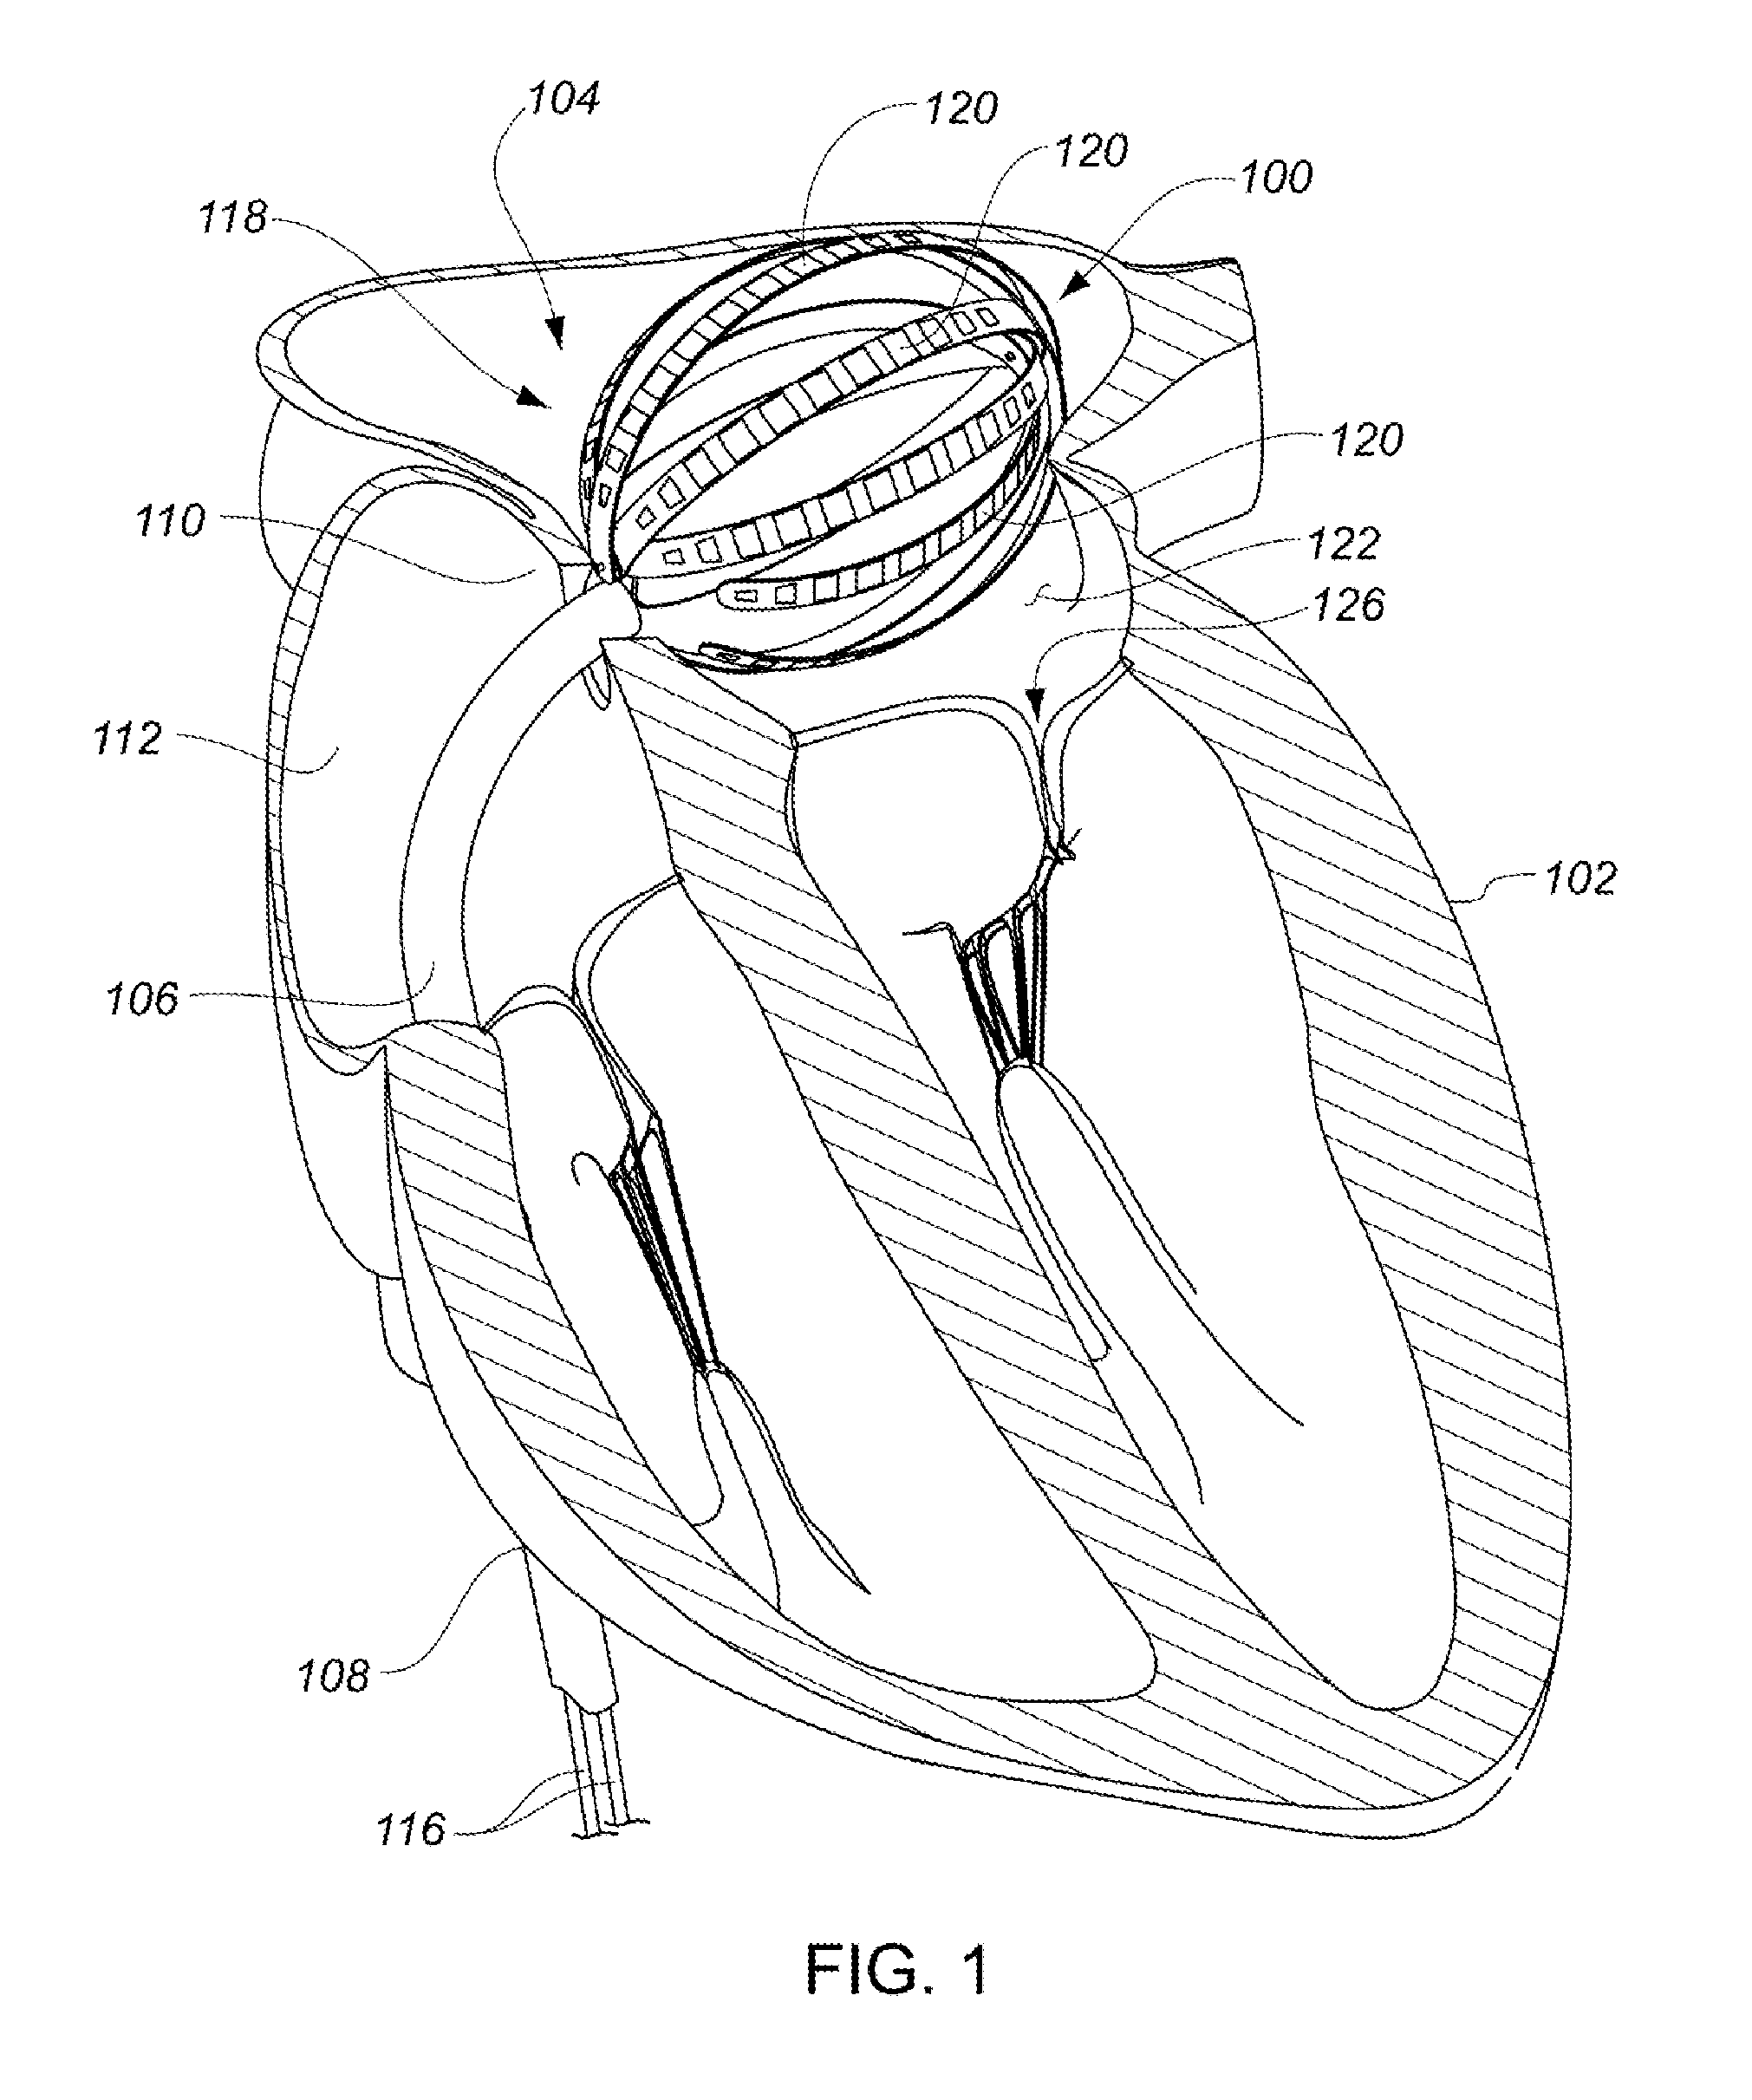 Enhanced medical device for use in bodily cavities, for example an atrium